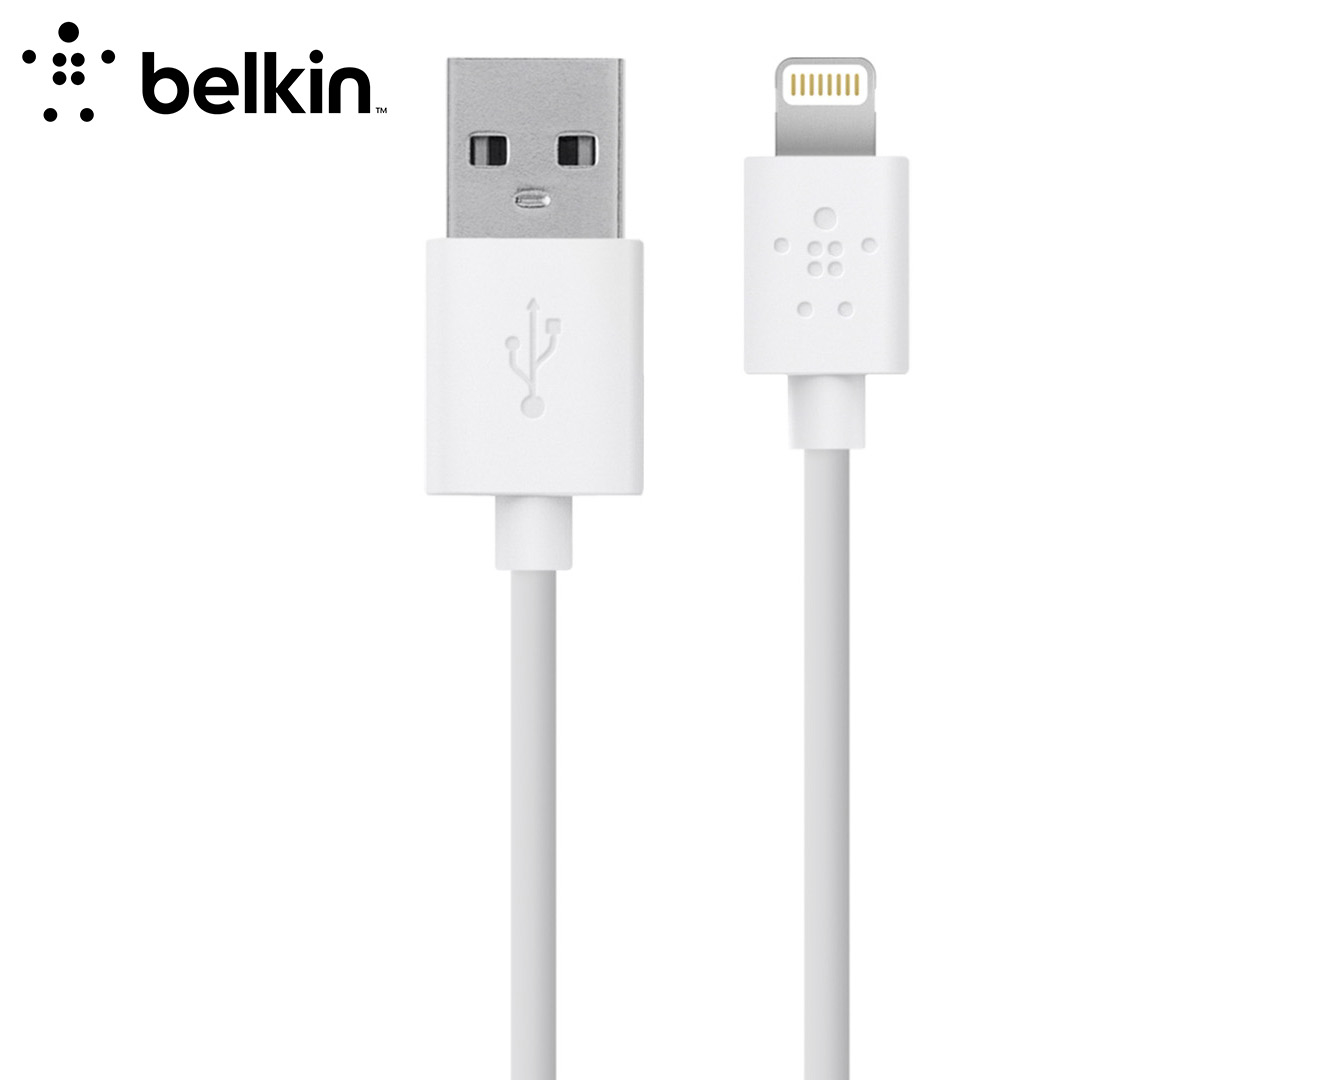 Belkin Mixit Lightning to USB ChargeSync Cable - White